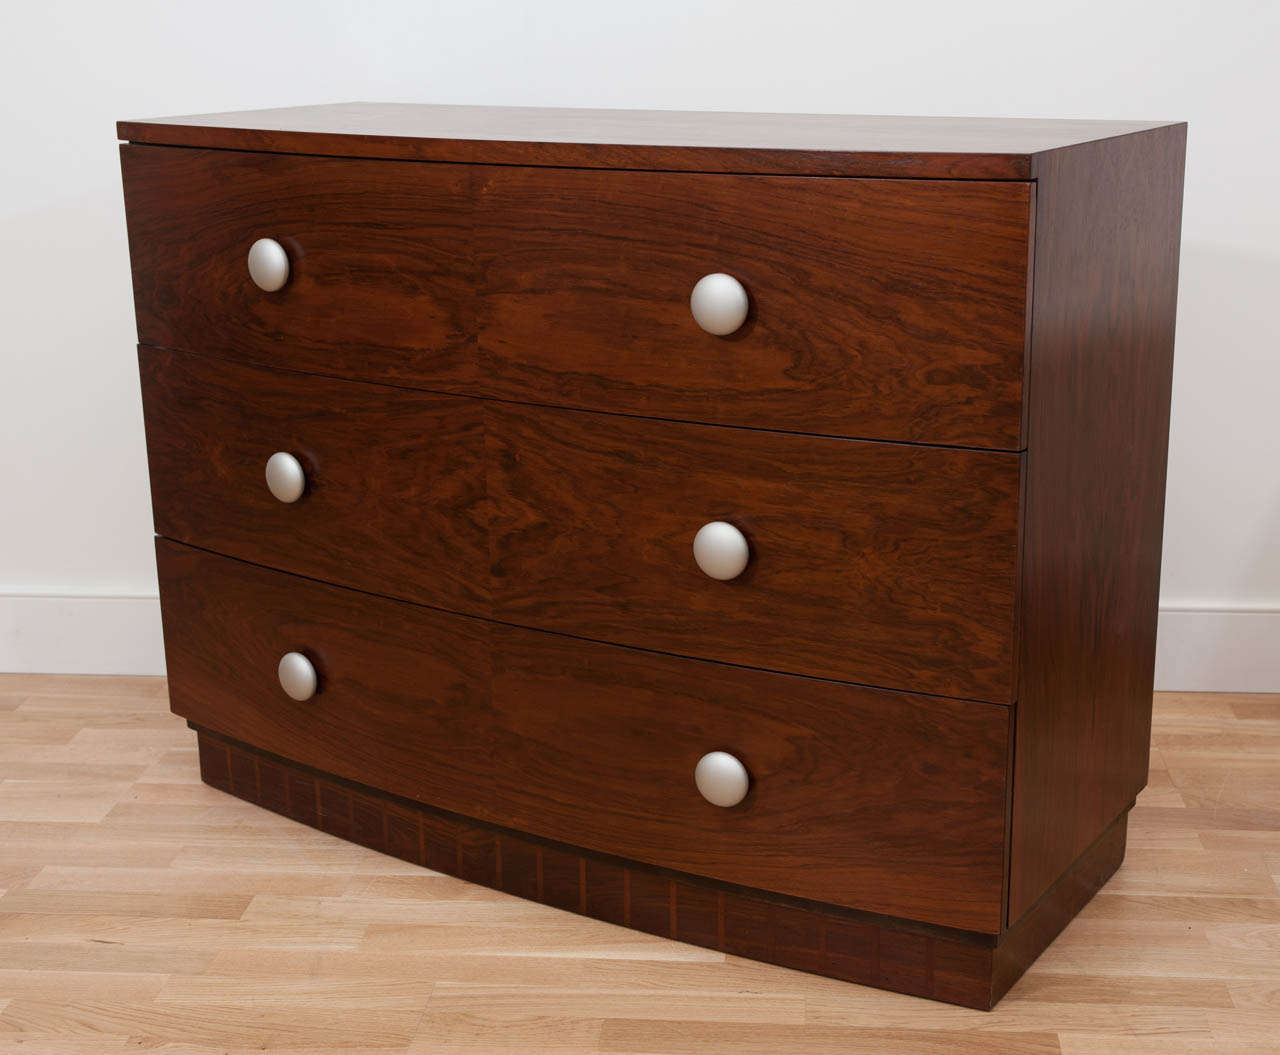 A sumptuous pair of rosewood veneer Art Deco chests designed by French designer Gilbert Rohde for the Herman Miller Company. Restored and refinished with contemporary hardware.